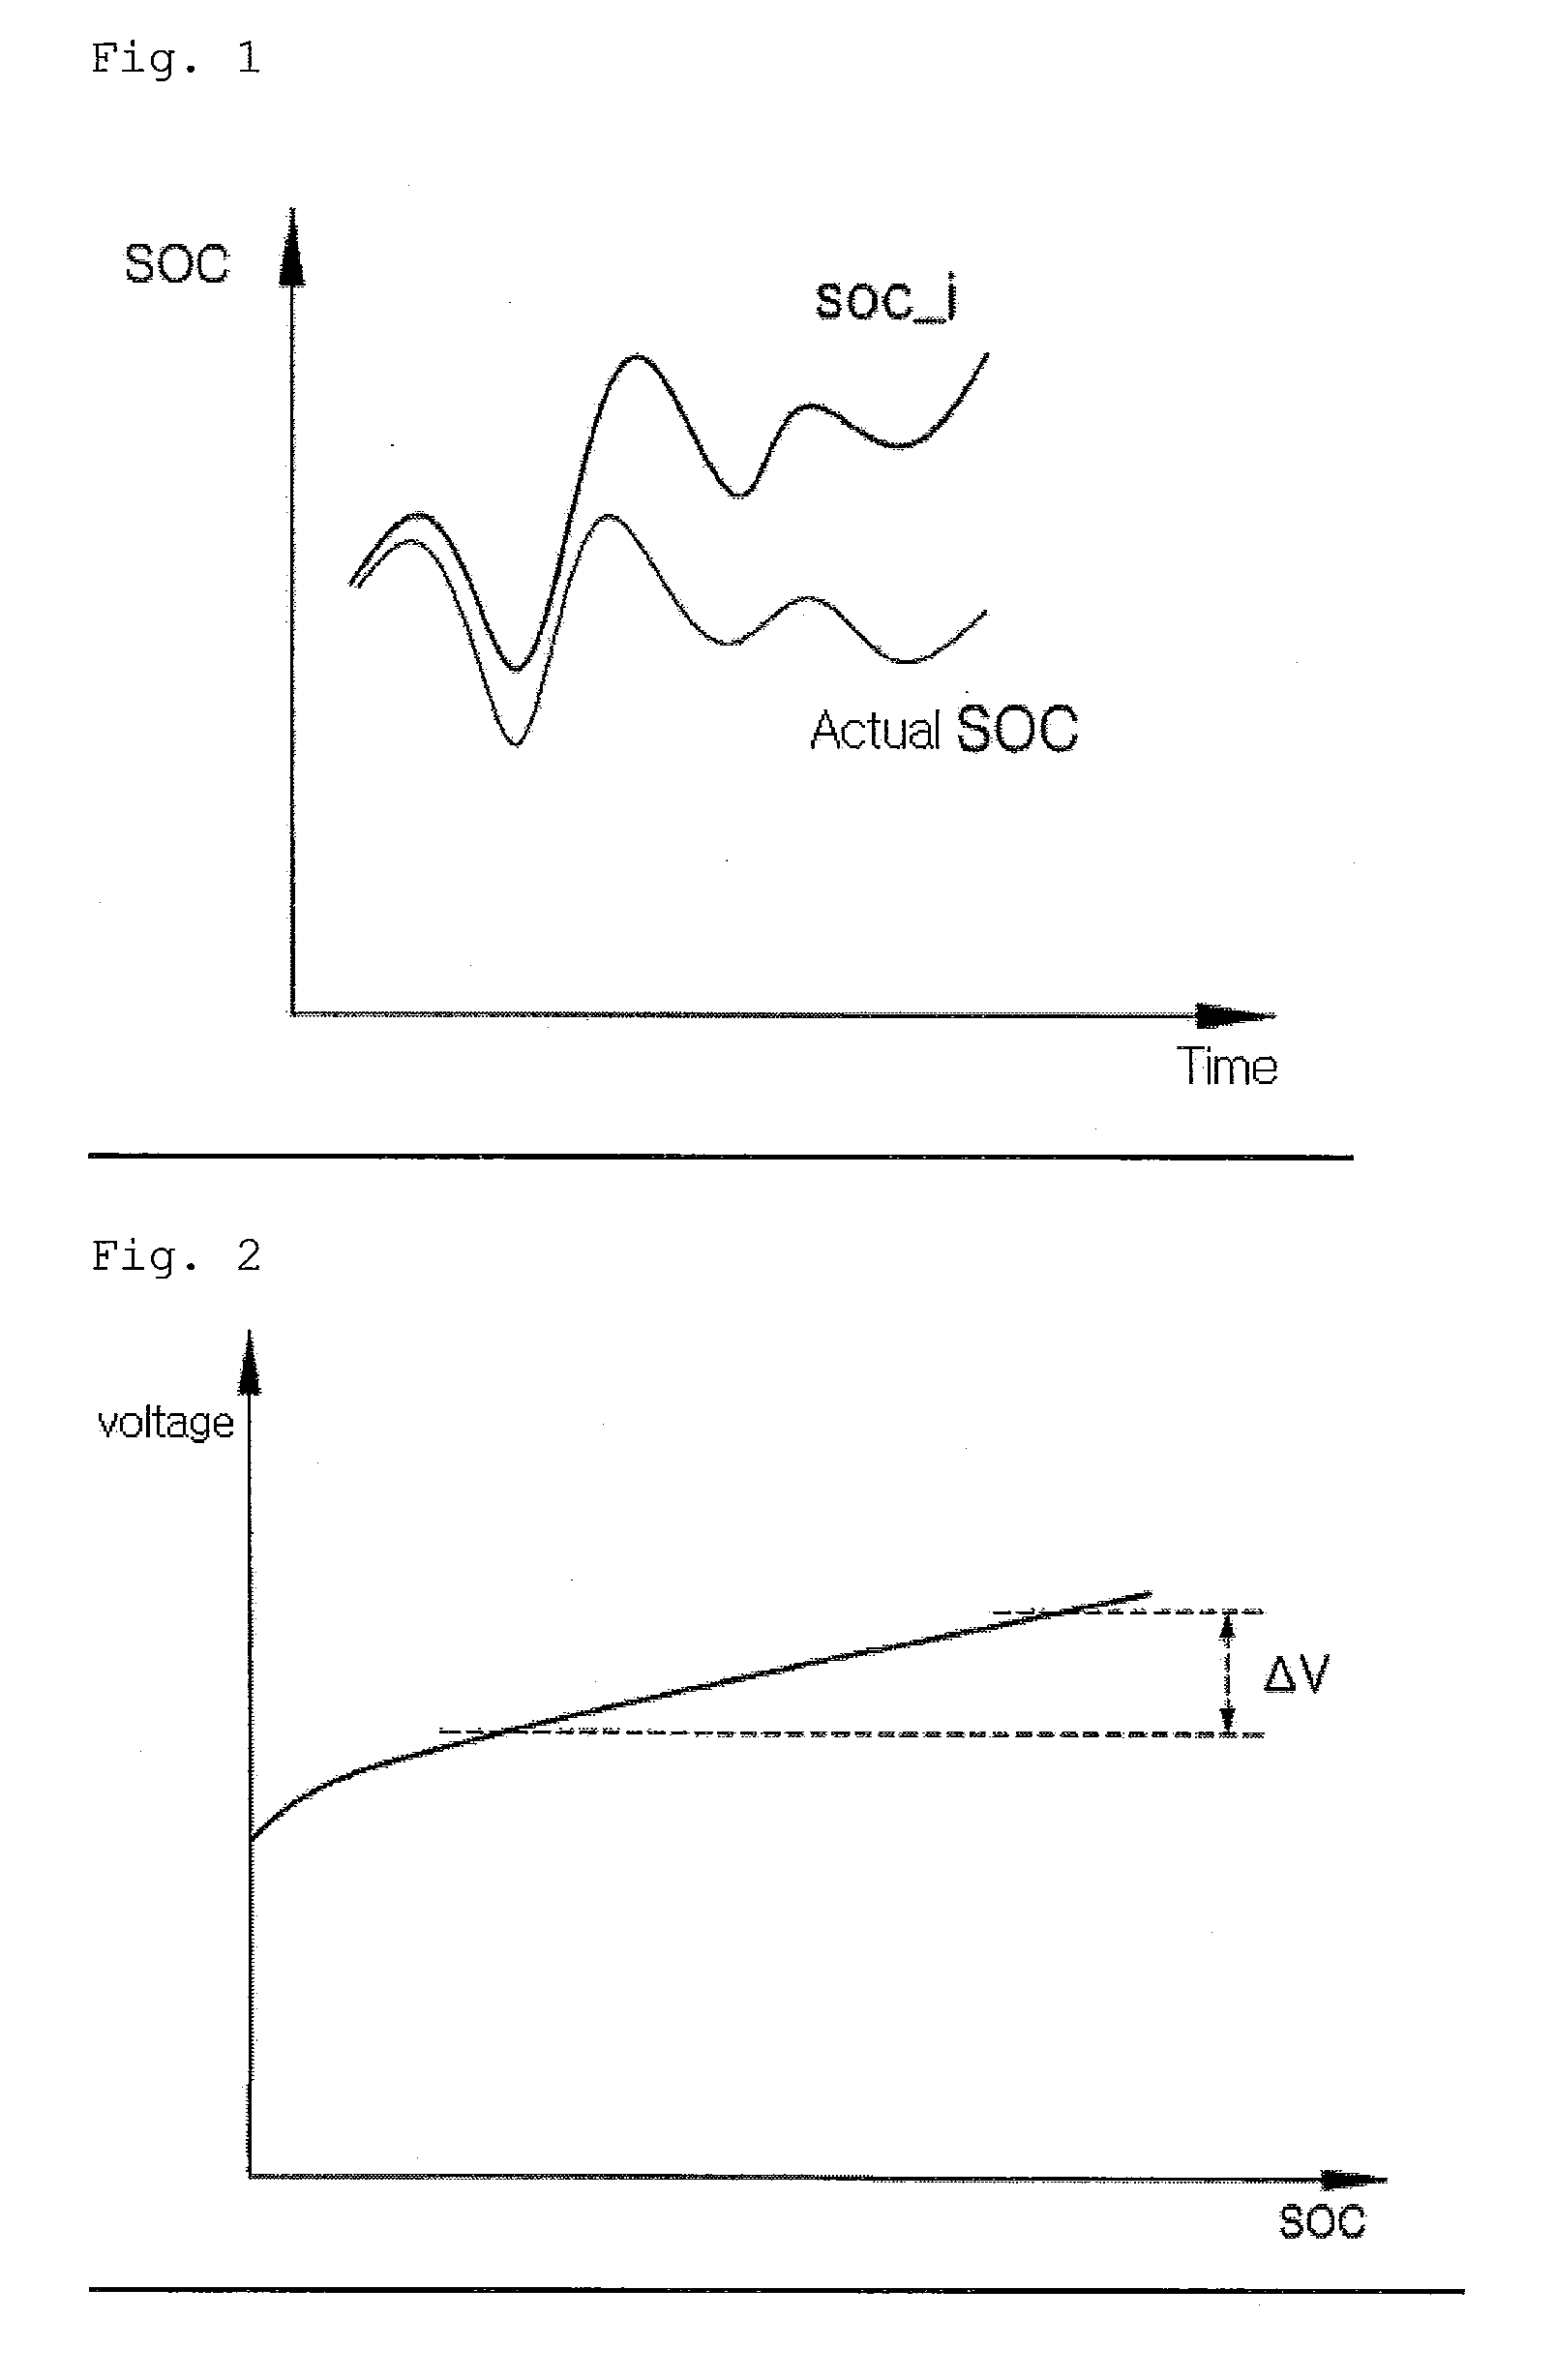 Method for Measuring SOC of a Battery in a Battery Management System and the Apparatus Thereof